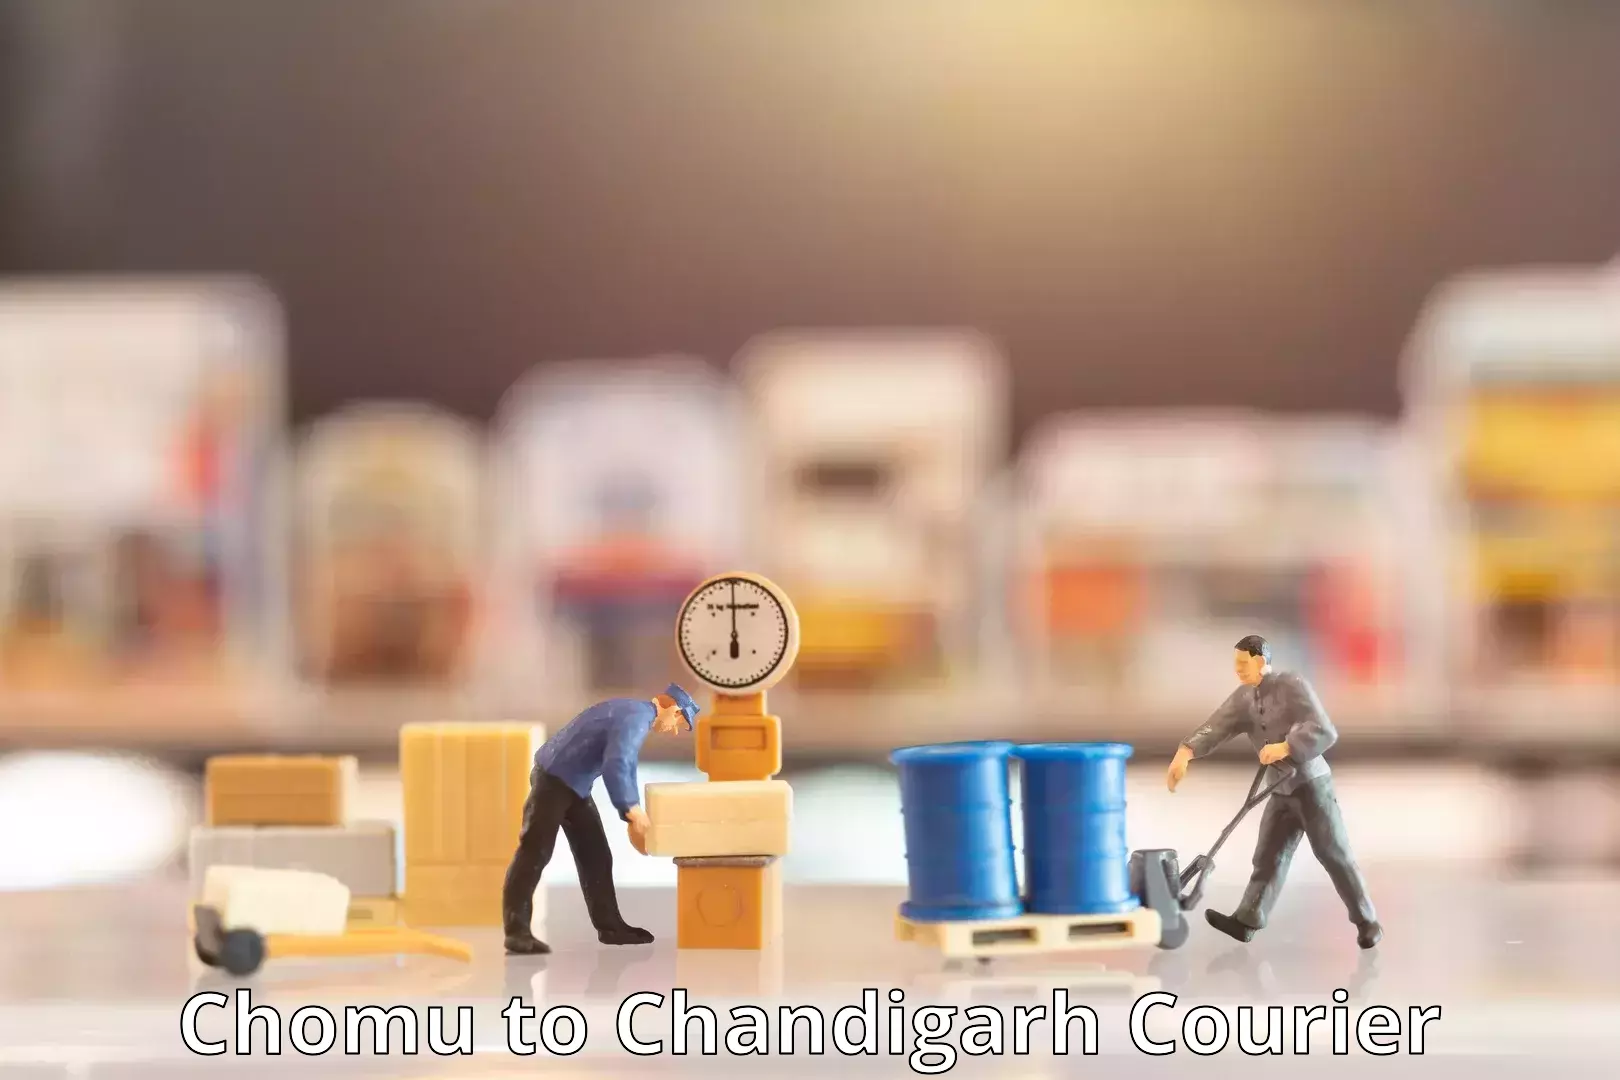 Global shipping solutions Chomu to Chandigarh